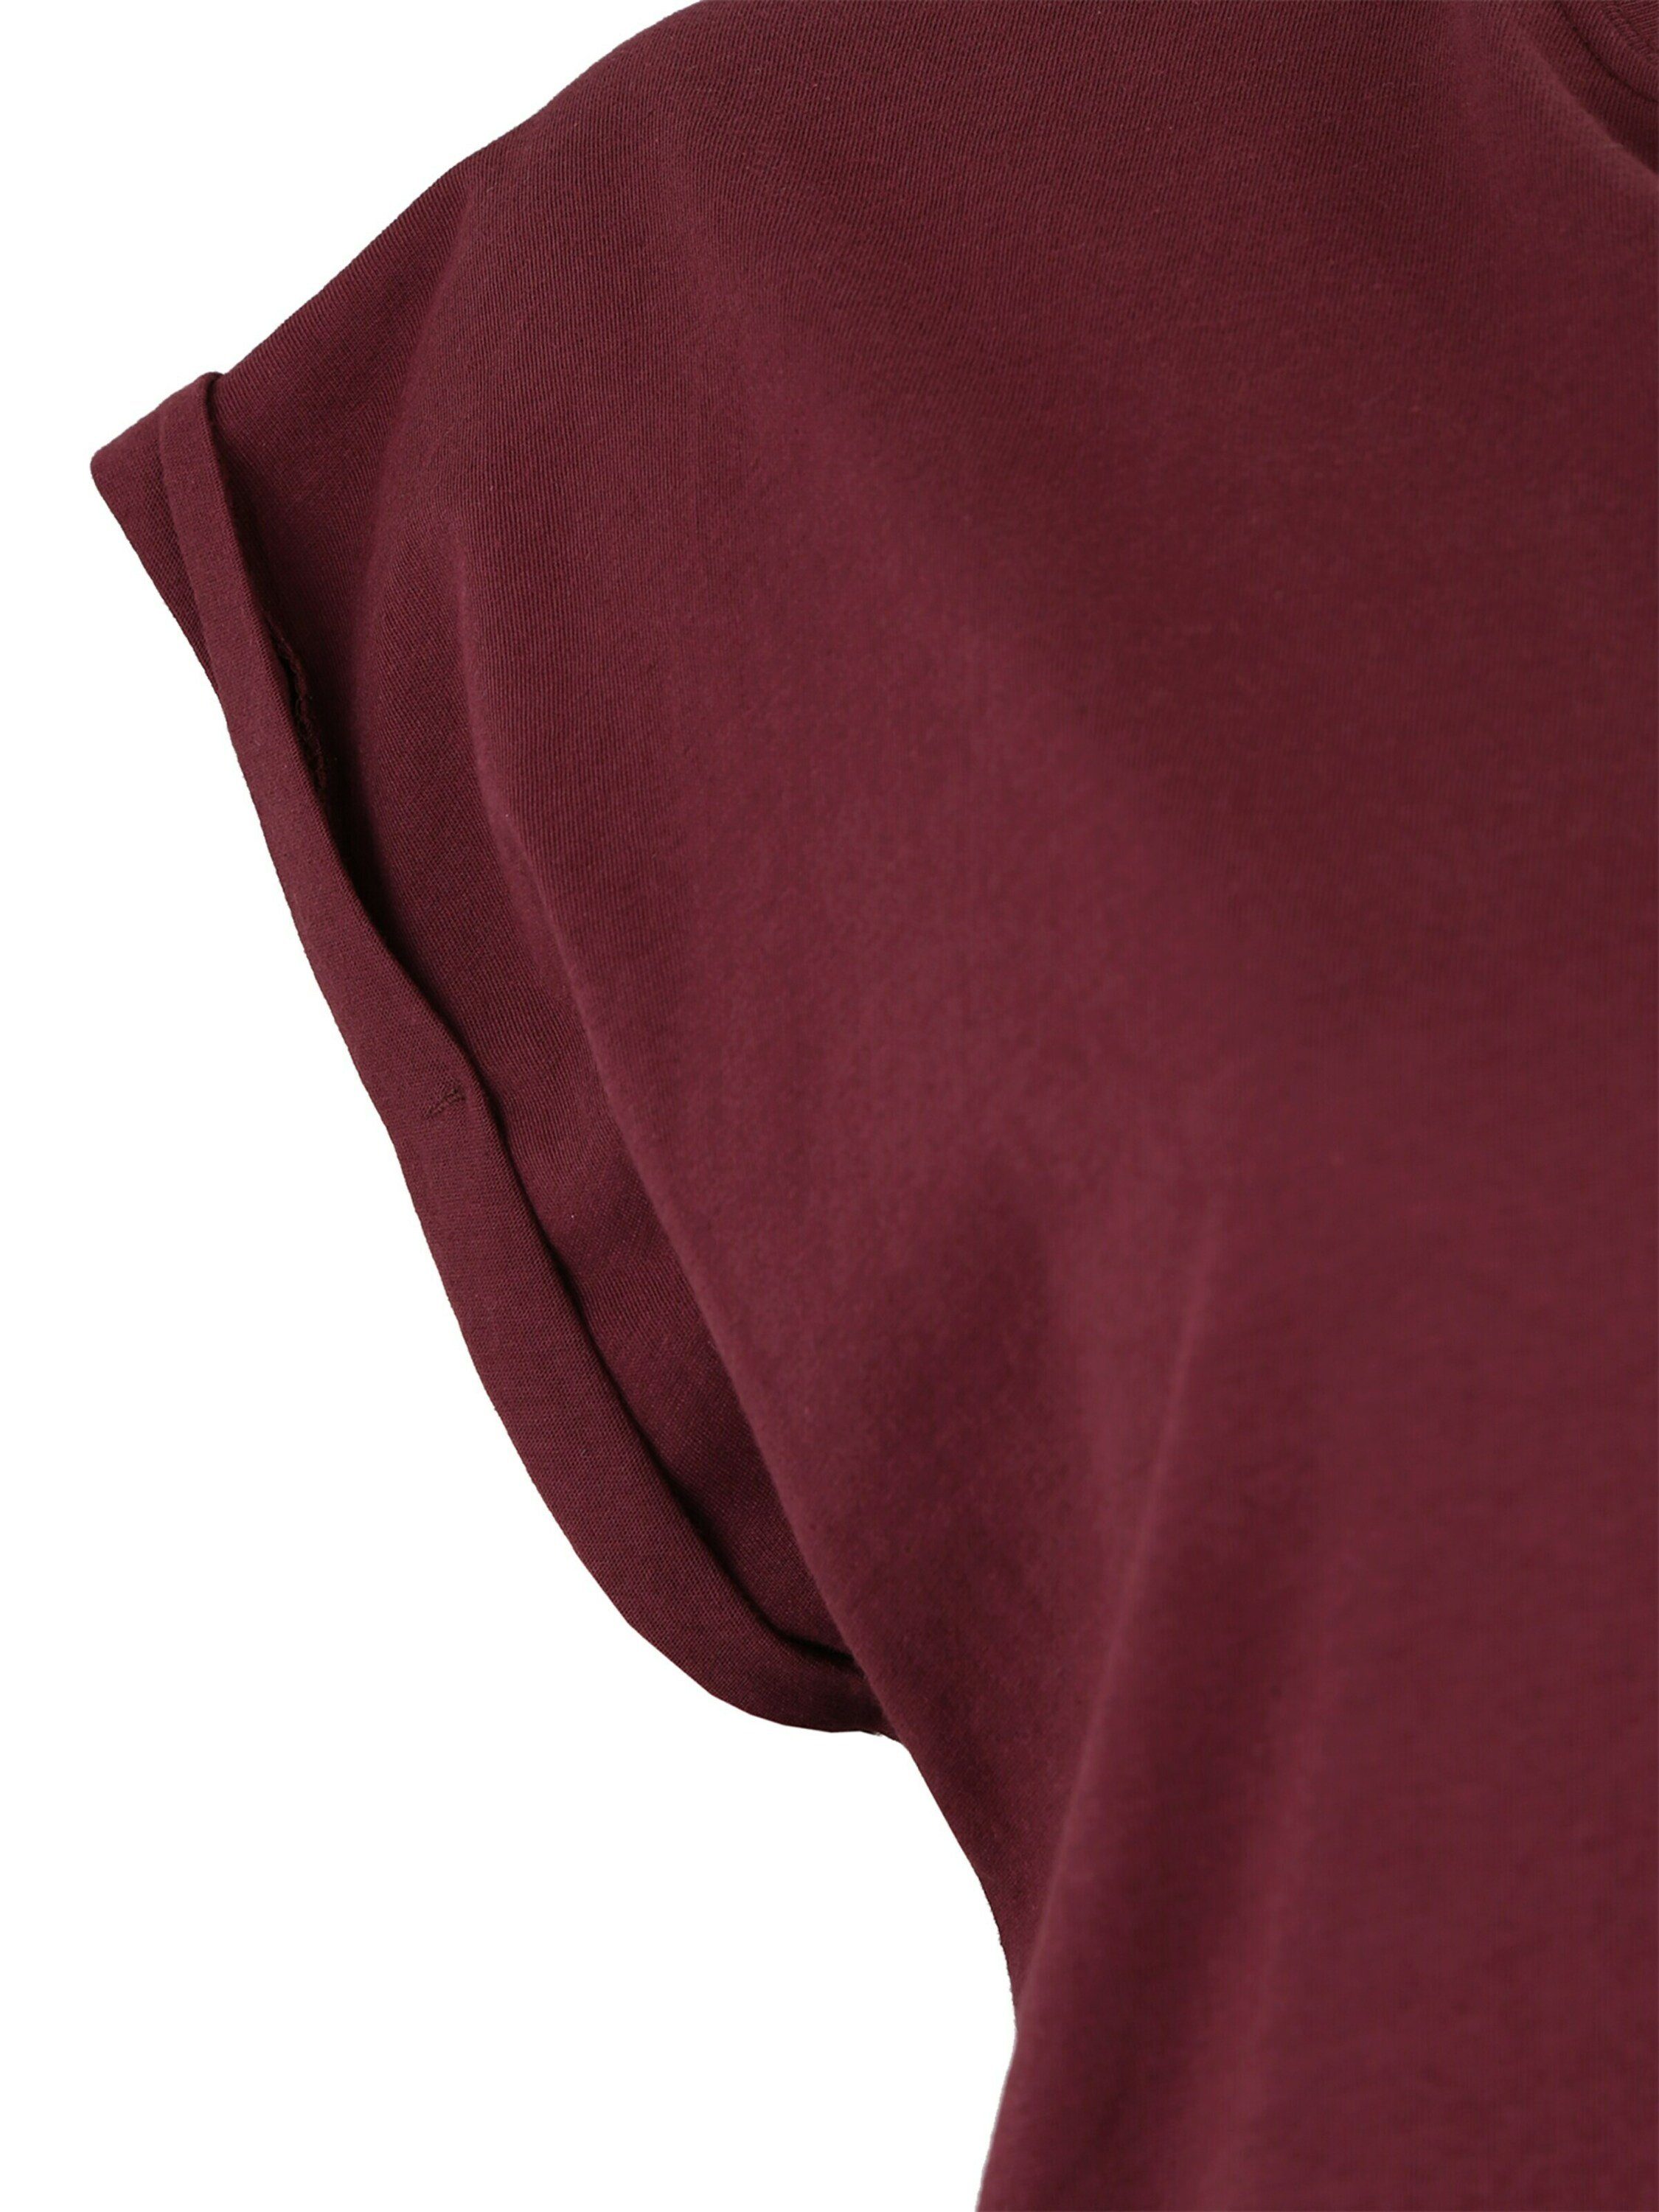 Plain/ohne (1-tlg) Details, T-Shirt CLASSICS Detail URBAN brombeer Weiteres